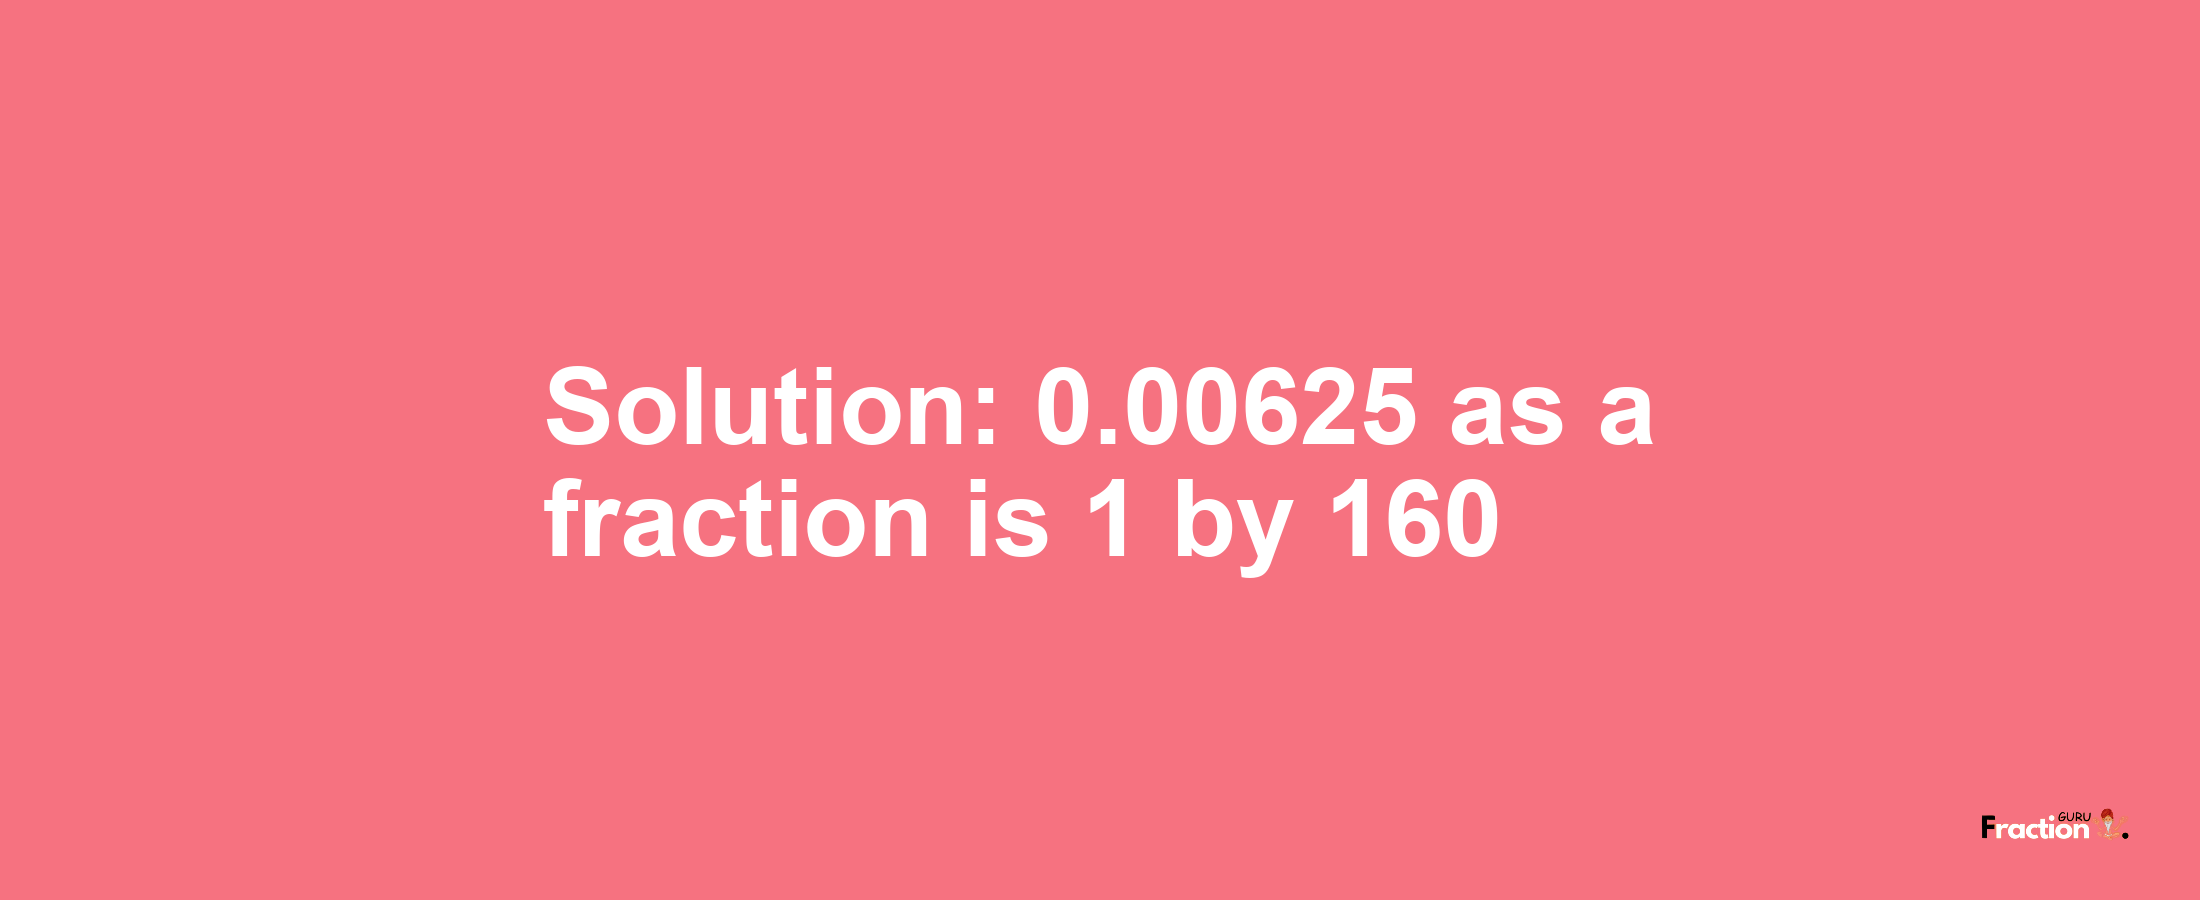 Solution:0.00625 as a fraction is 1/160